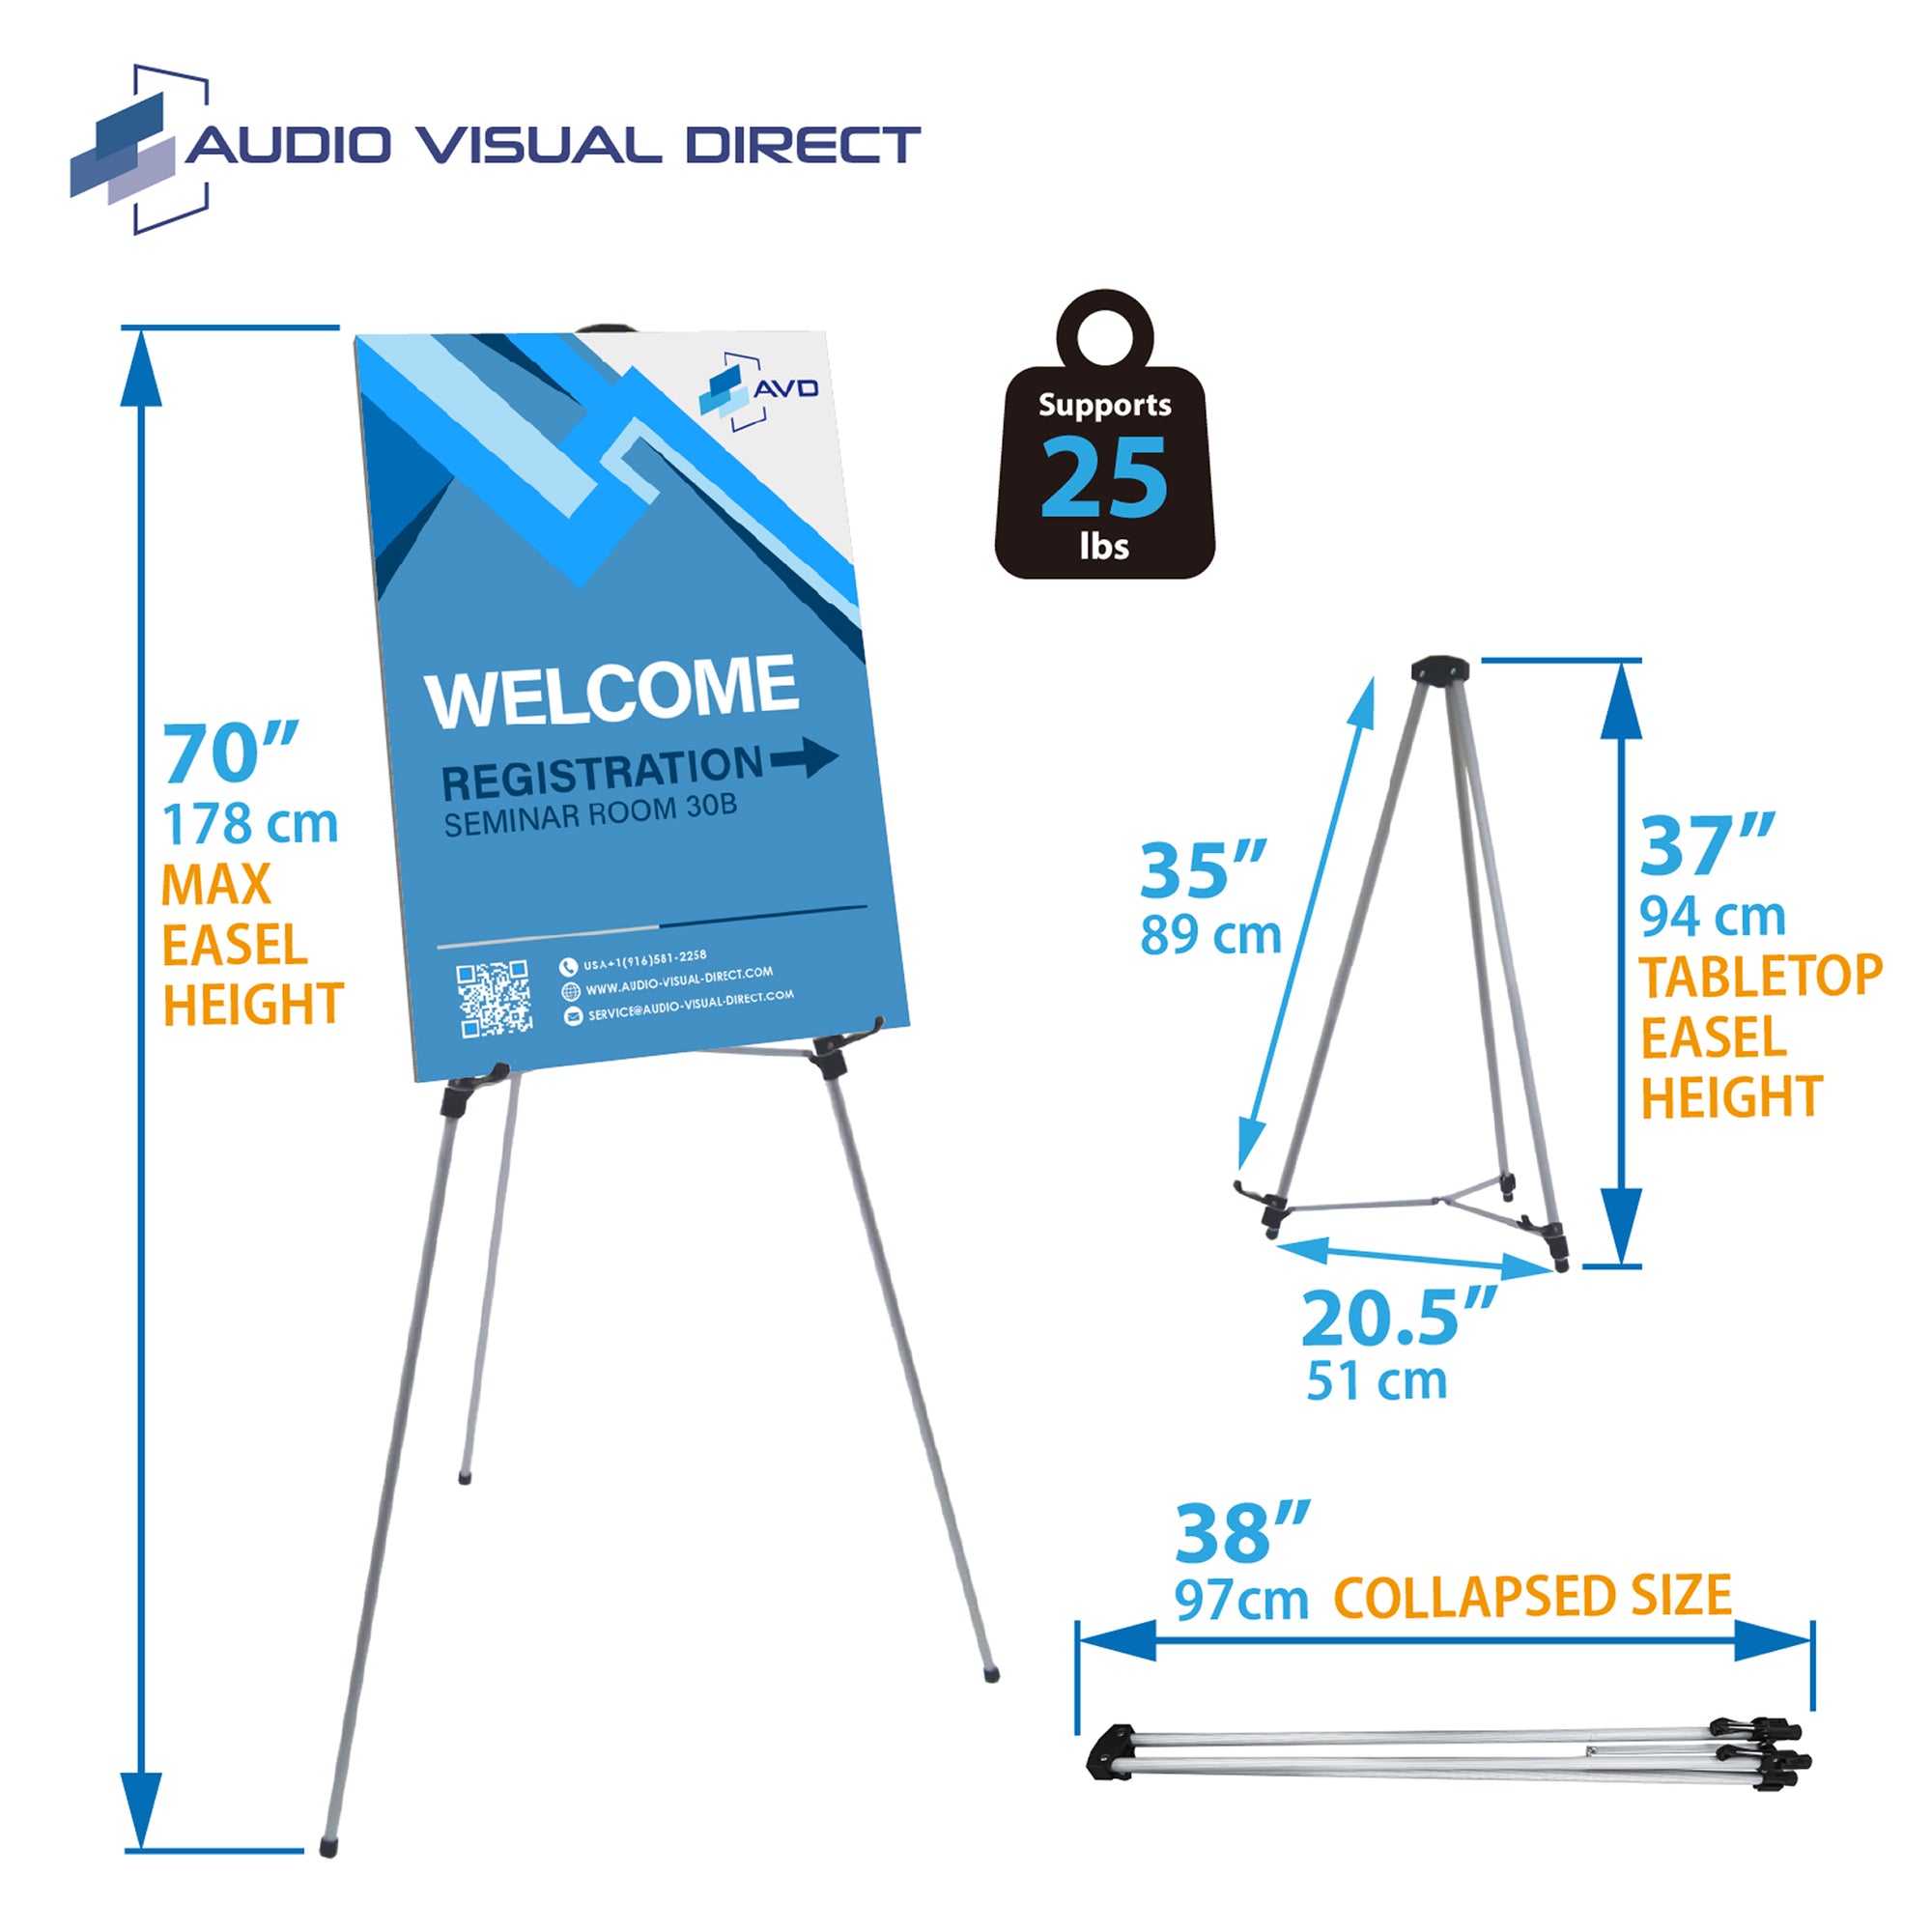 Infographic of our easel showing the weight capacity. Max height of 70 inches and collapsed size of 38 inches. 